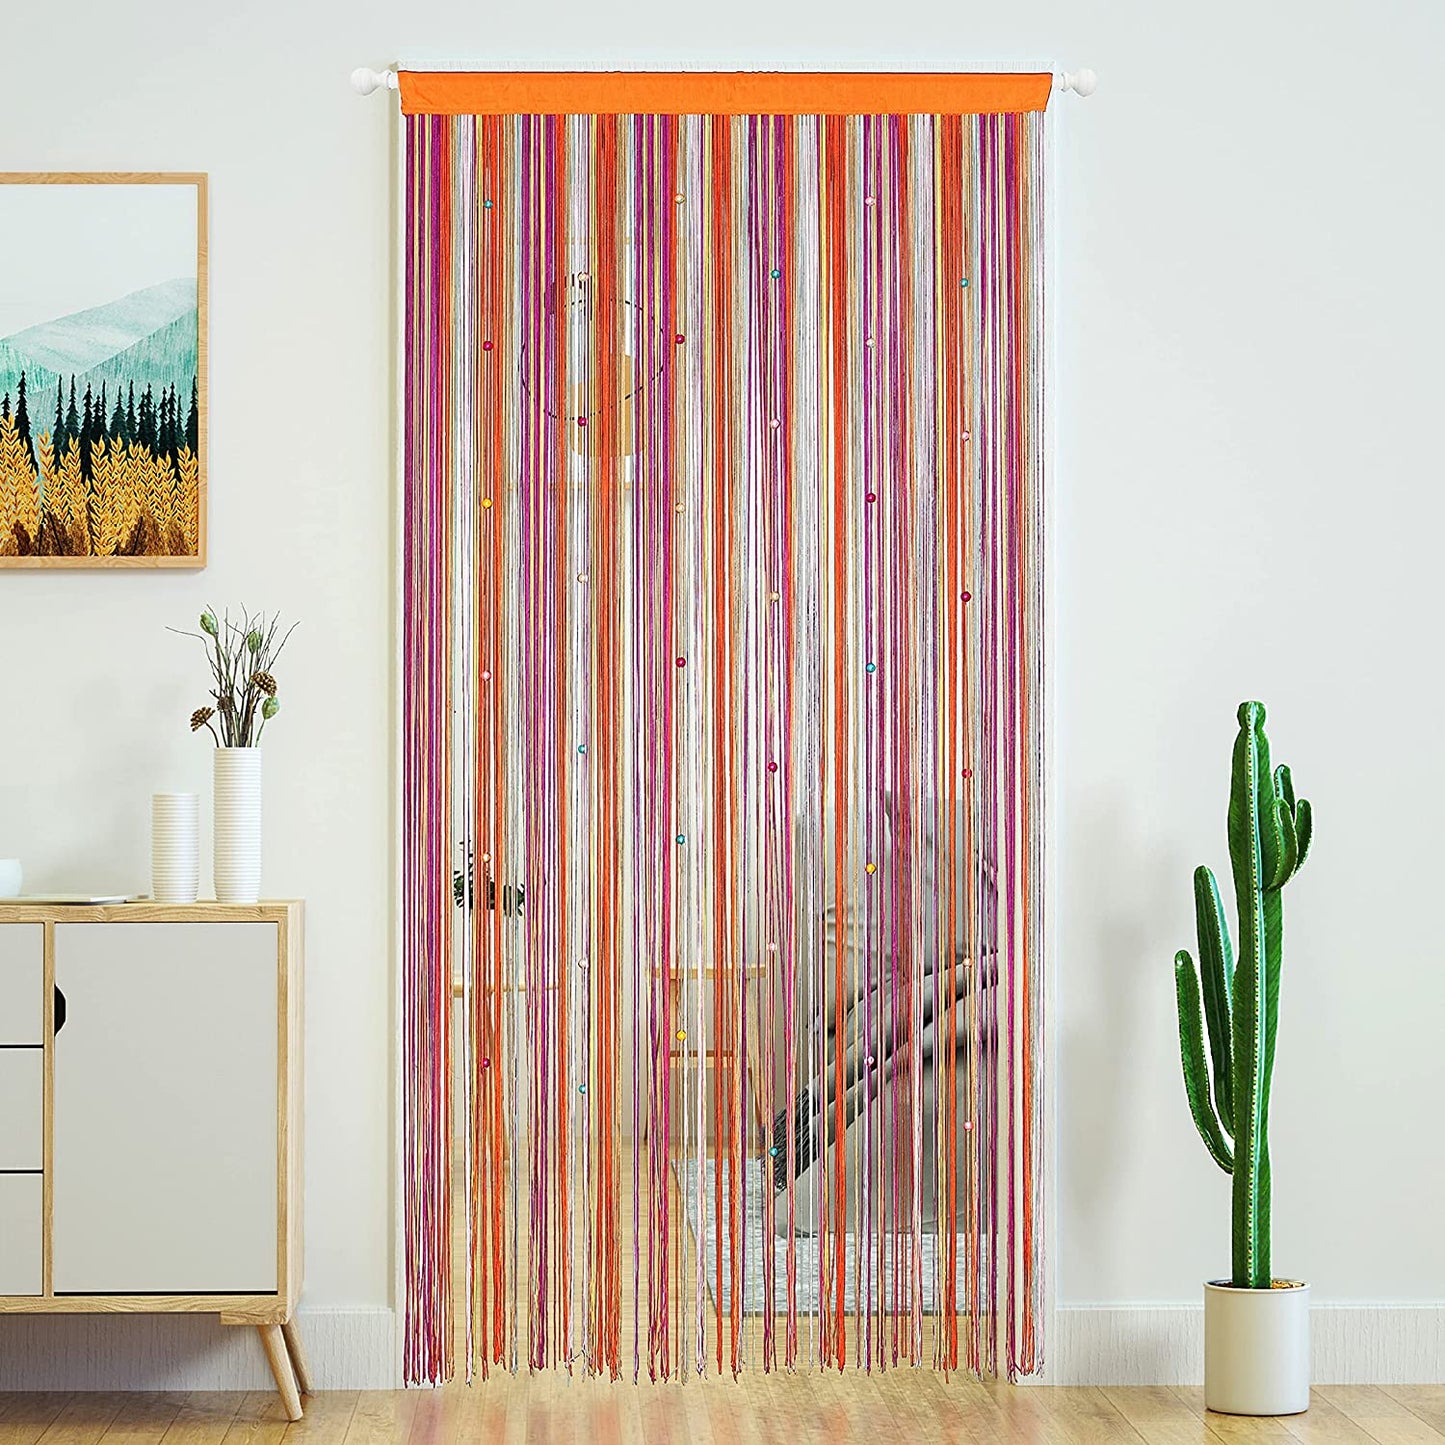 Yaoyue Beaded Curtain Door String Curtains for Doorway Tassels Beads Hanging Fringe Hippie Room Divider Window Hallway Entrance Wall Closet Bedroom Privacy Decor (39×79In/100×200Cm, Light Coffee)  YaoYue Rainbow 100×200Cm 